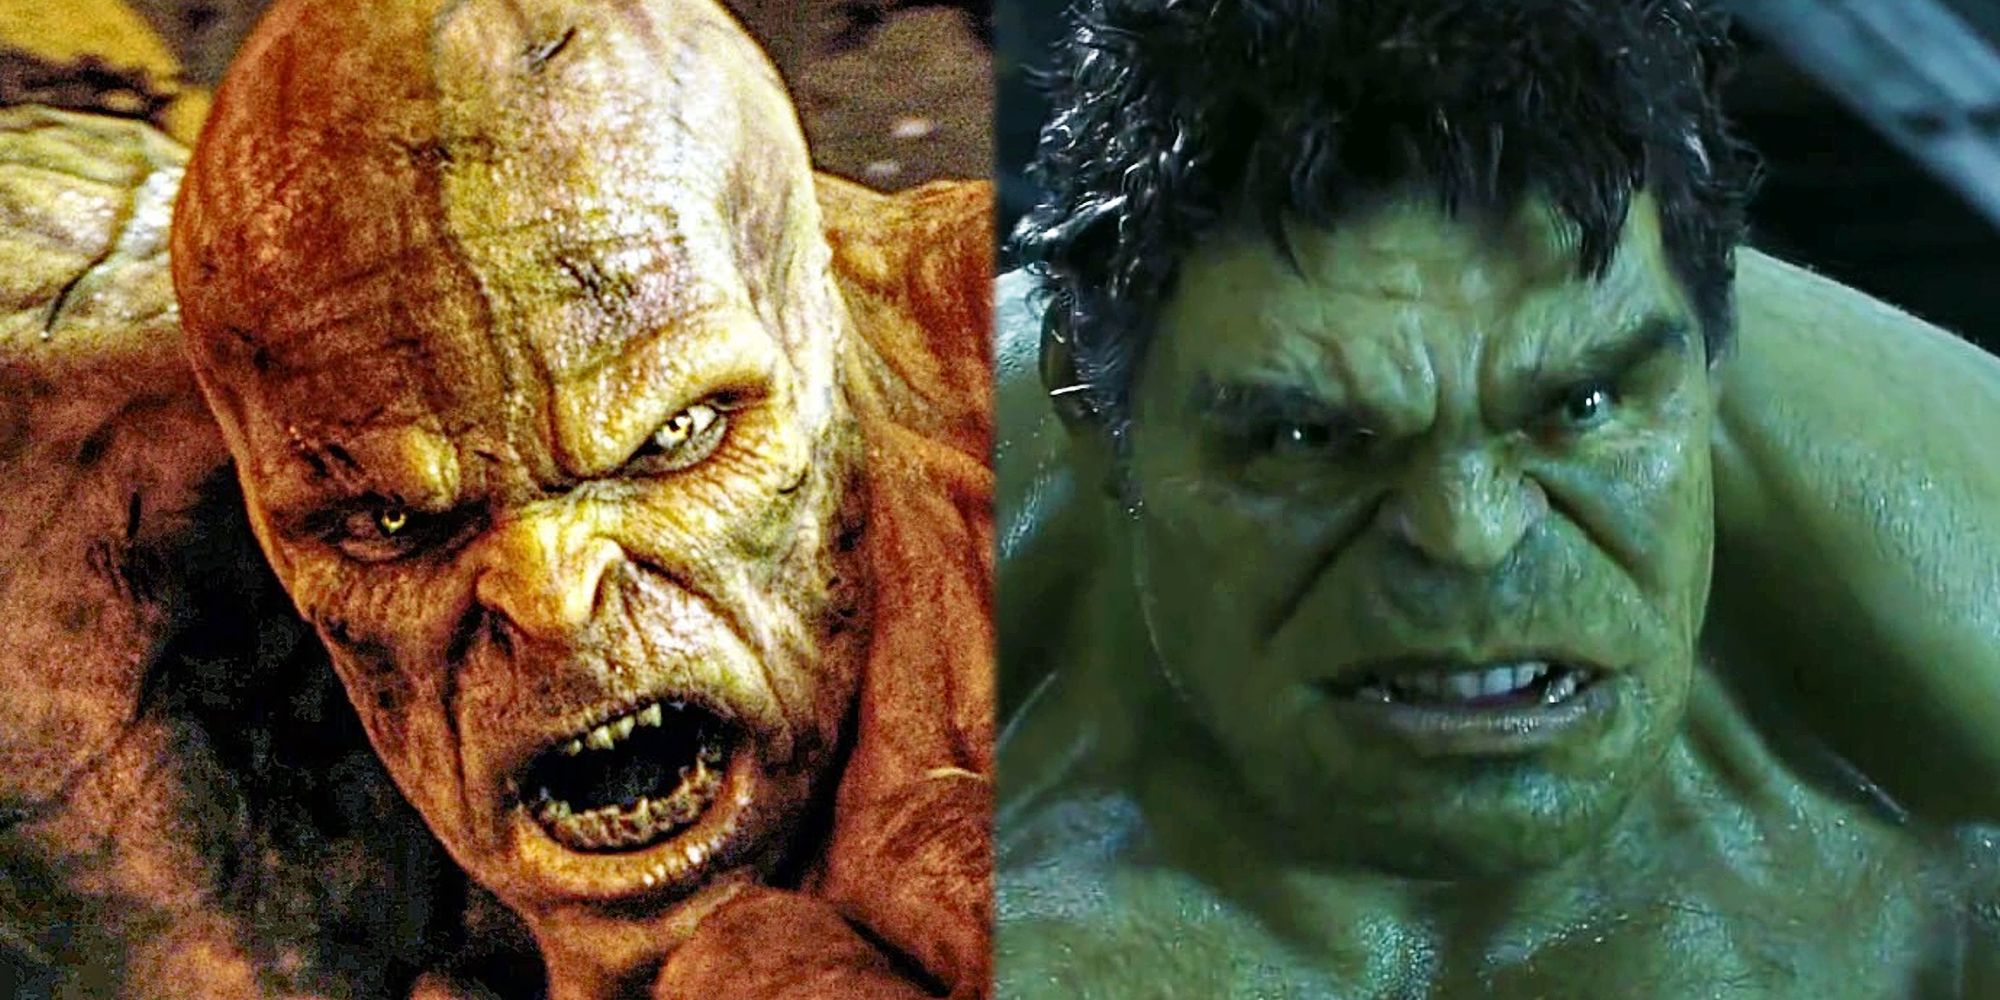 Abomination and Hulk in The Incredible Hulk and The Avengers